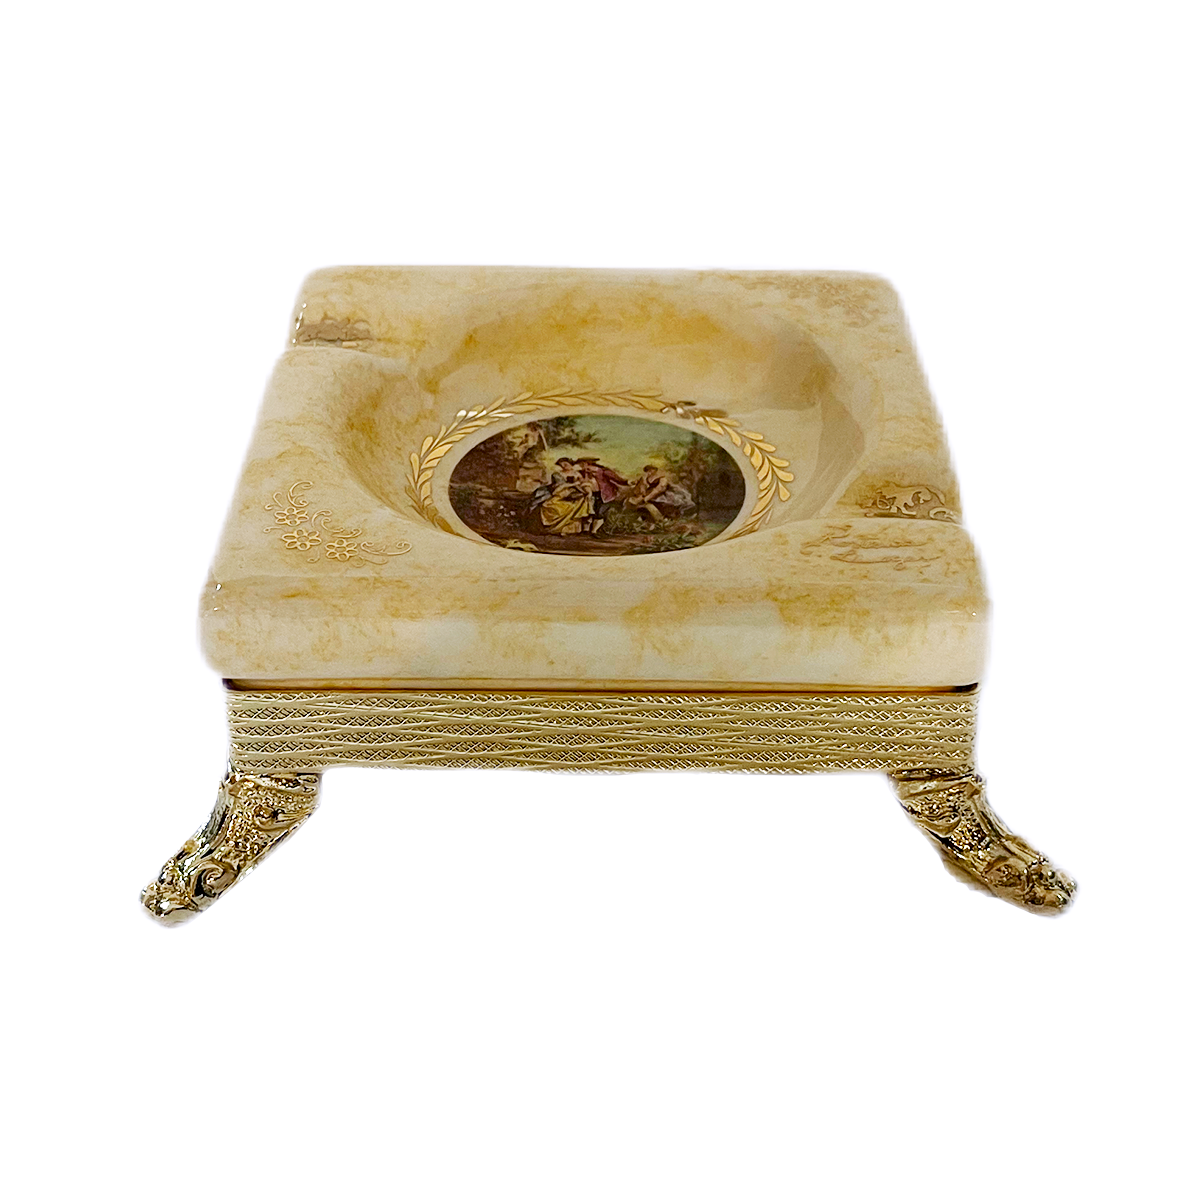 Limoge Rostema Ashtray with Gold Plated Legs -Romeo & Juliet -Beige & Gold -14x14x5 cm